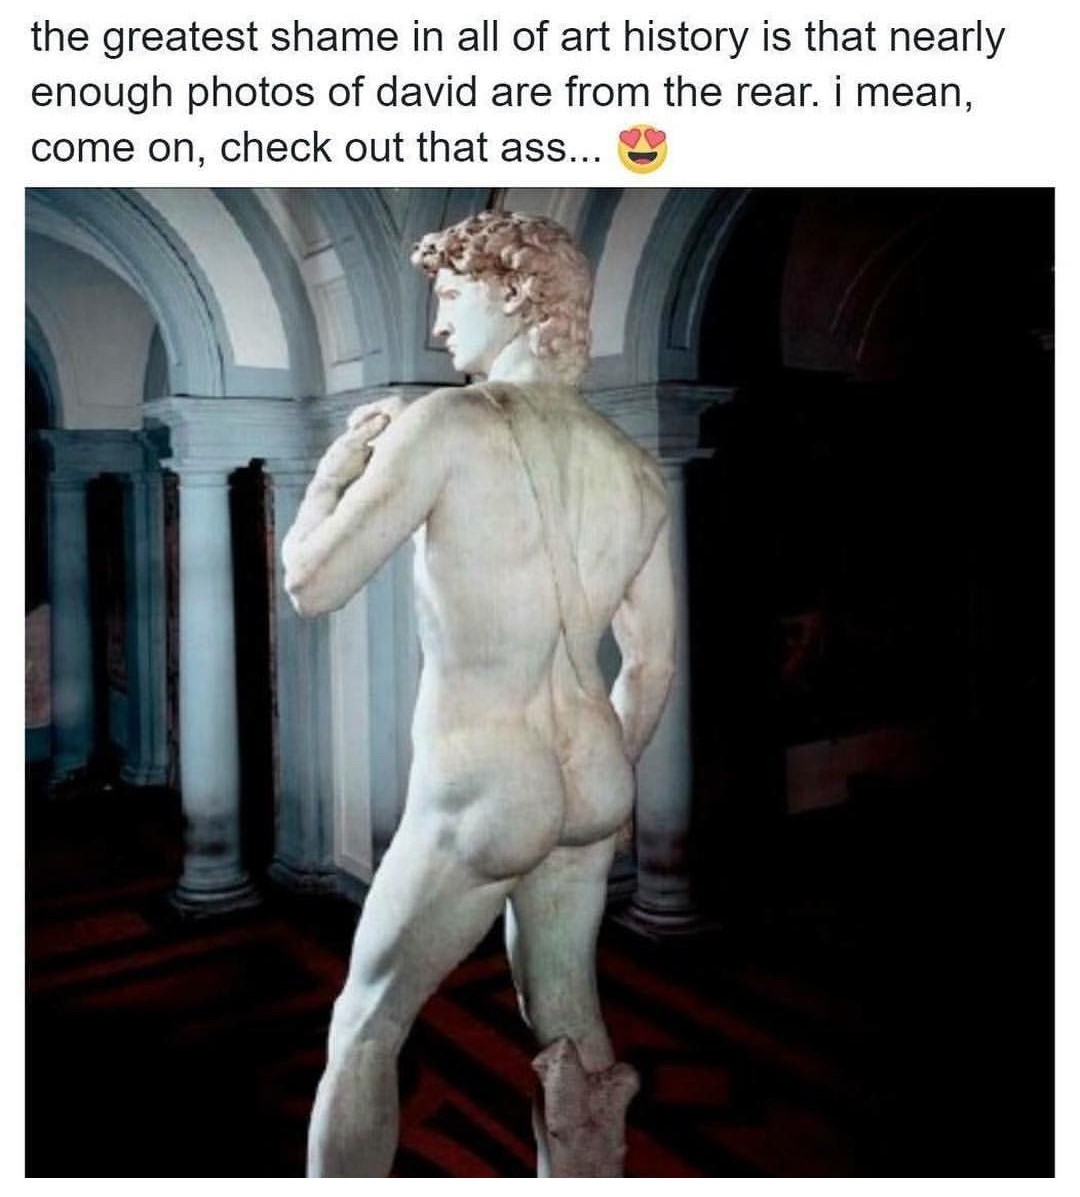 memes - david - the greatest shame in all of art history is that nearly enough photos of david are from the rear. i mean, come on, check out that ass...